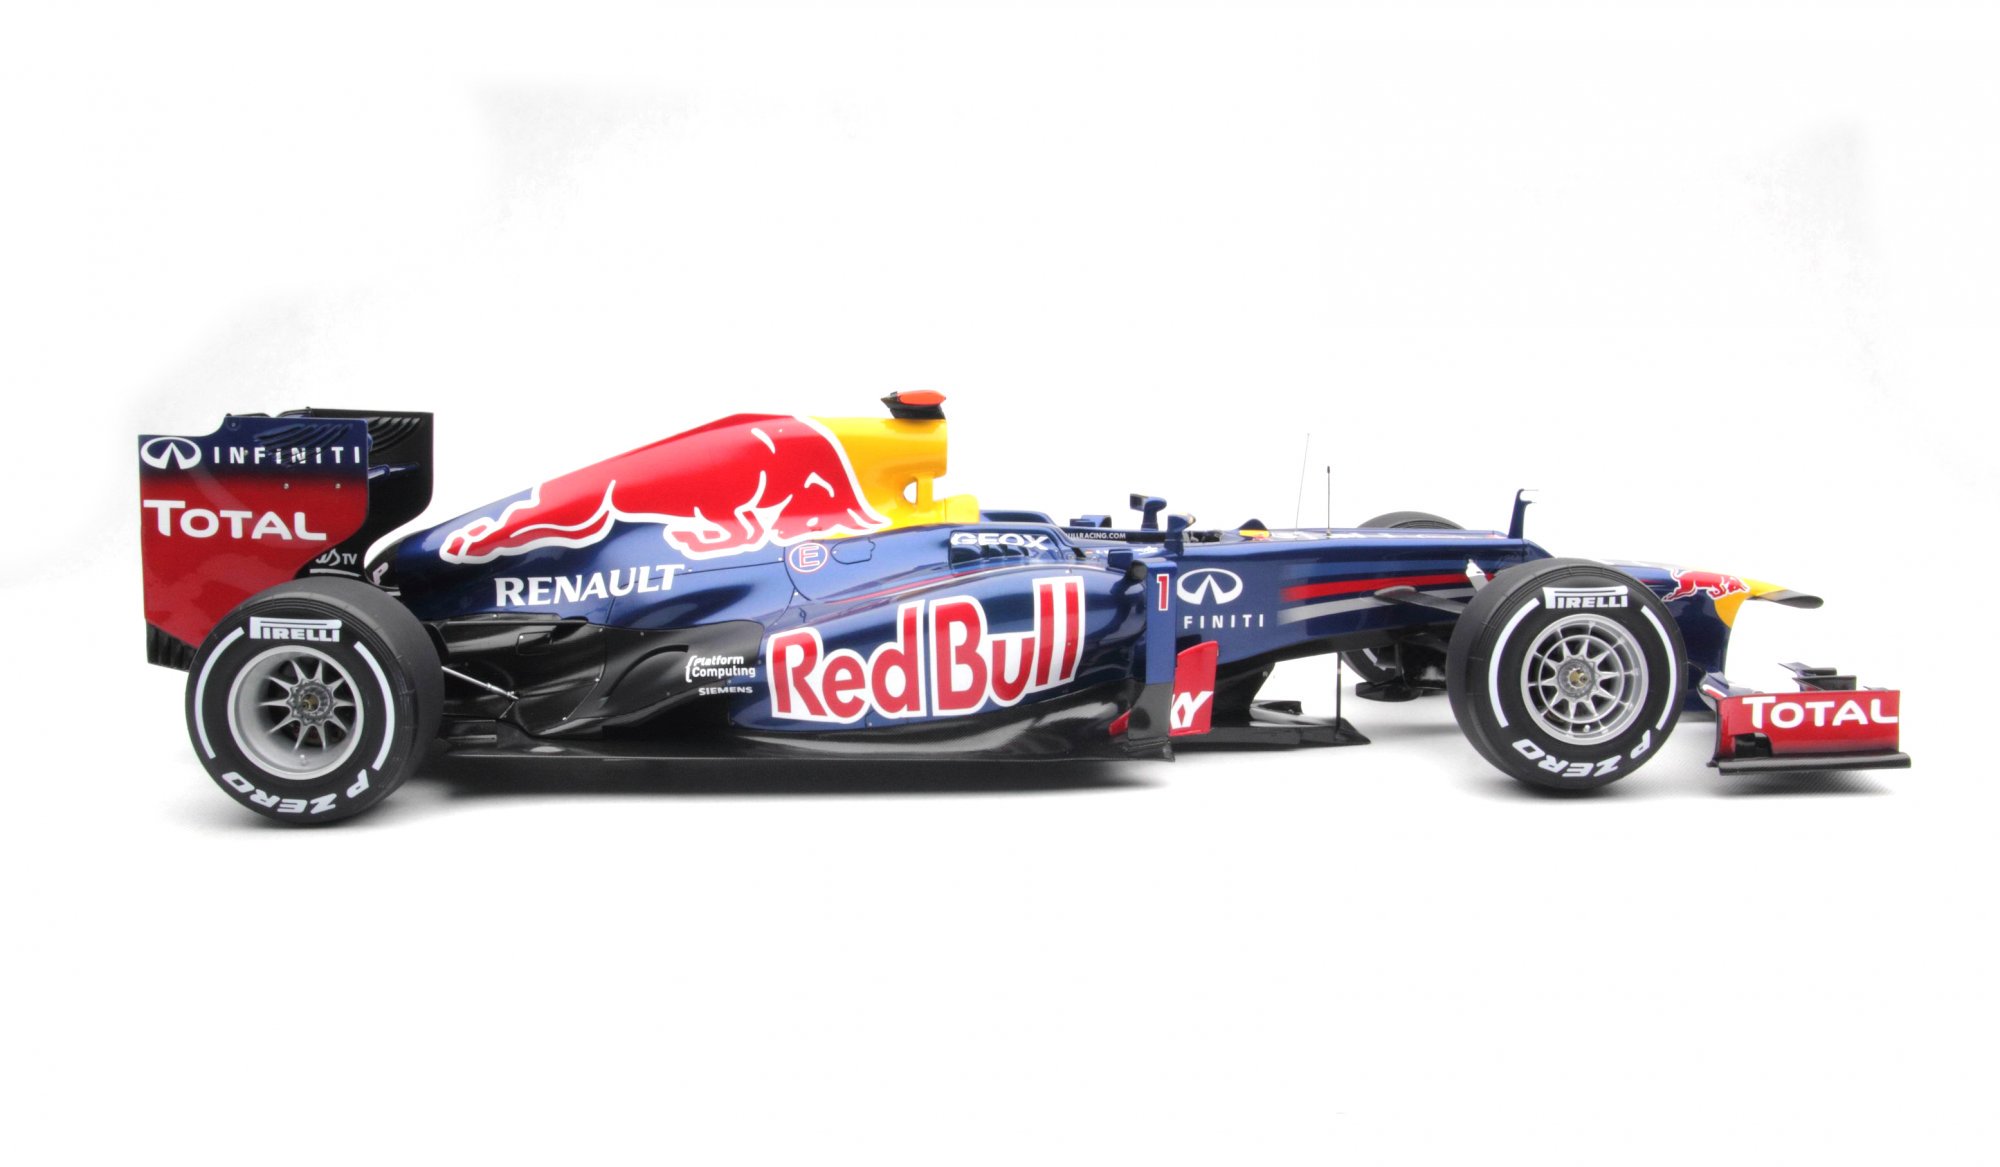 Revealing the Oracle Red Bull Racing RB18 at 1:4 scale – Amalgam Collection